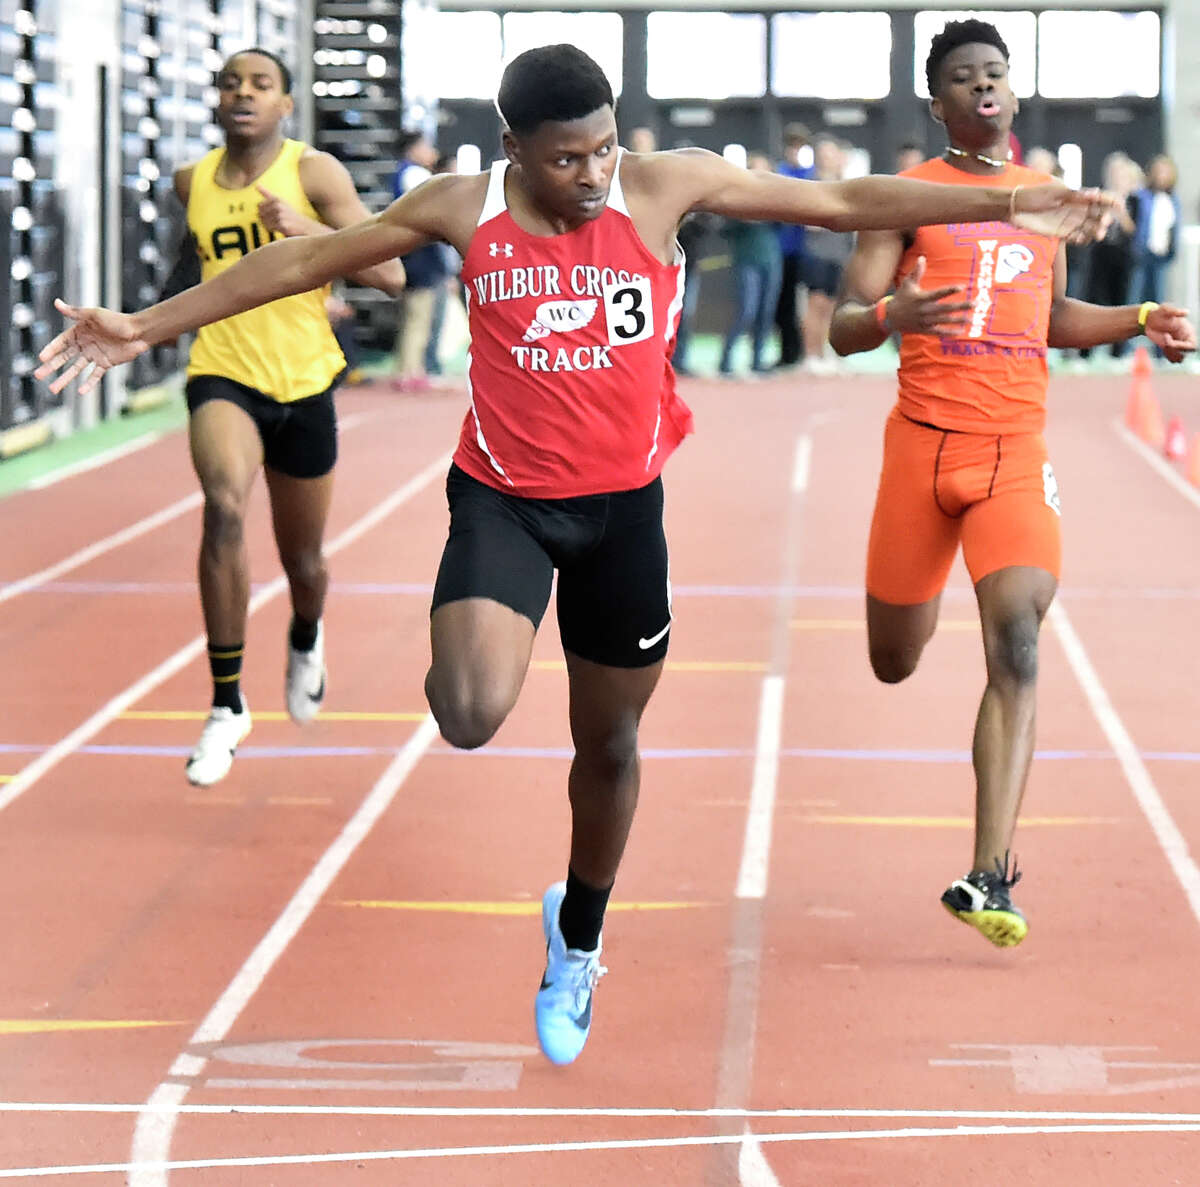 New Haven Connecticut - February 22, 2020: Caleb Owen of Wilbur Cross H.S. wins the boys 300-meter dash finals, center, crossing the finish line against third-place finisher Kymali Hay of Bloomfield H.S., right, and fourth-place finisher Rayshon Jacobs of Jonathan Law H.S, left. Jason Lorent of Shelton H.S. finished in second place. during the CIAC State Open Indoor Track Championship Saturday at the Floyd Little Athletic Center in New Haven.